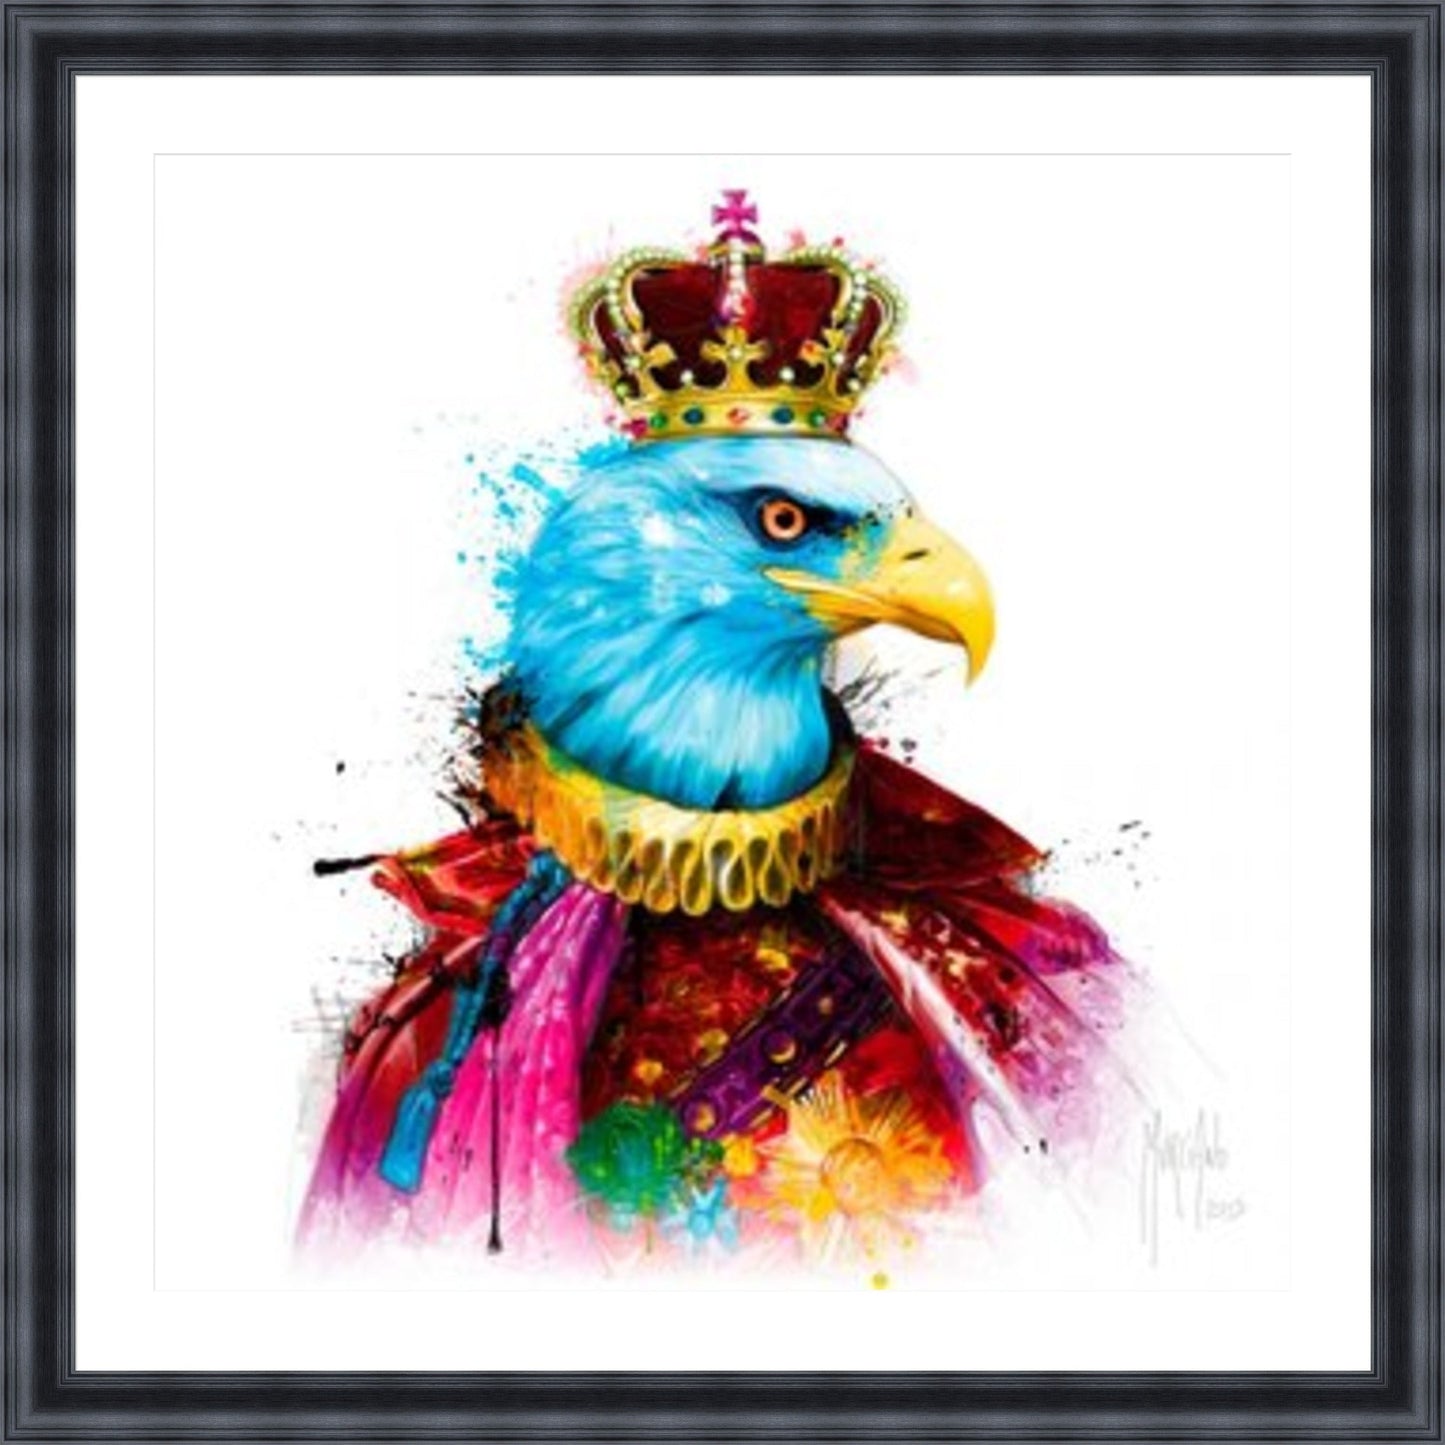 Aige Royal by Patrice Murciano